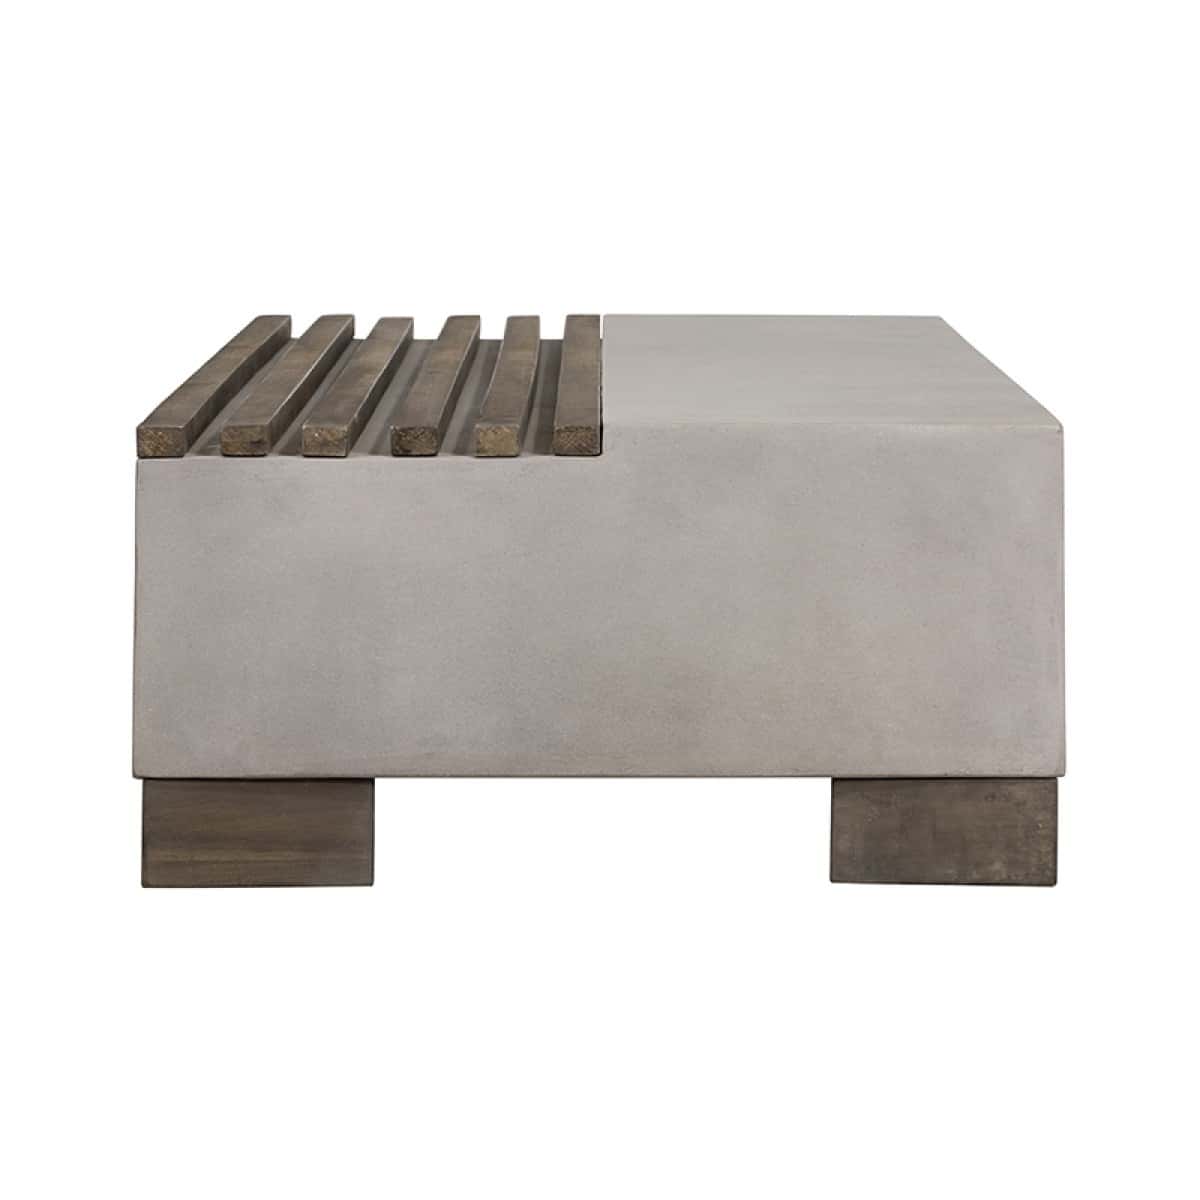 Modrest Delaware Modern Concrete & Acacia Rectangular Coffee Table by